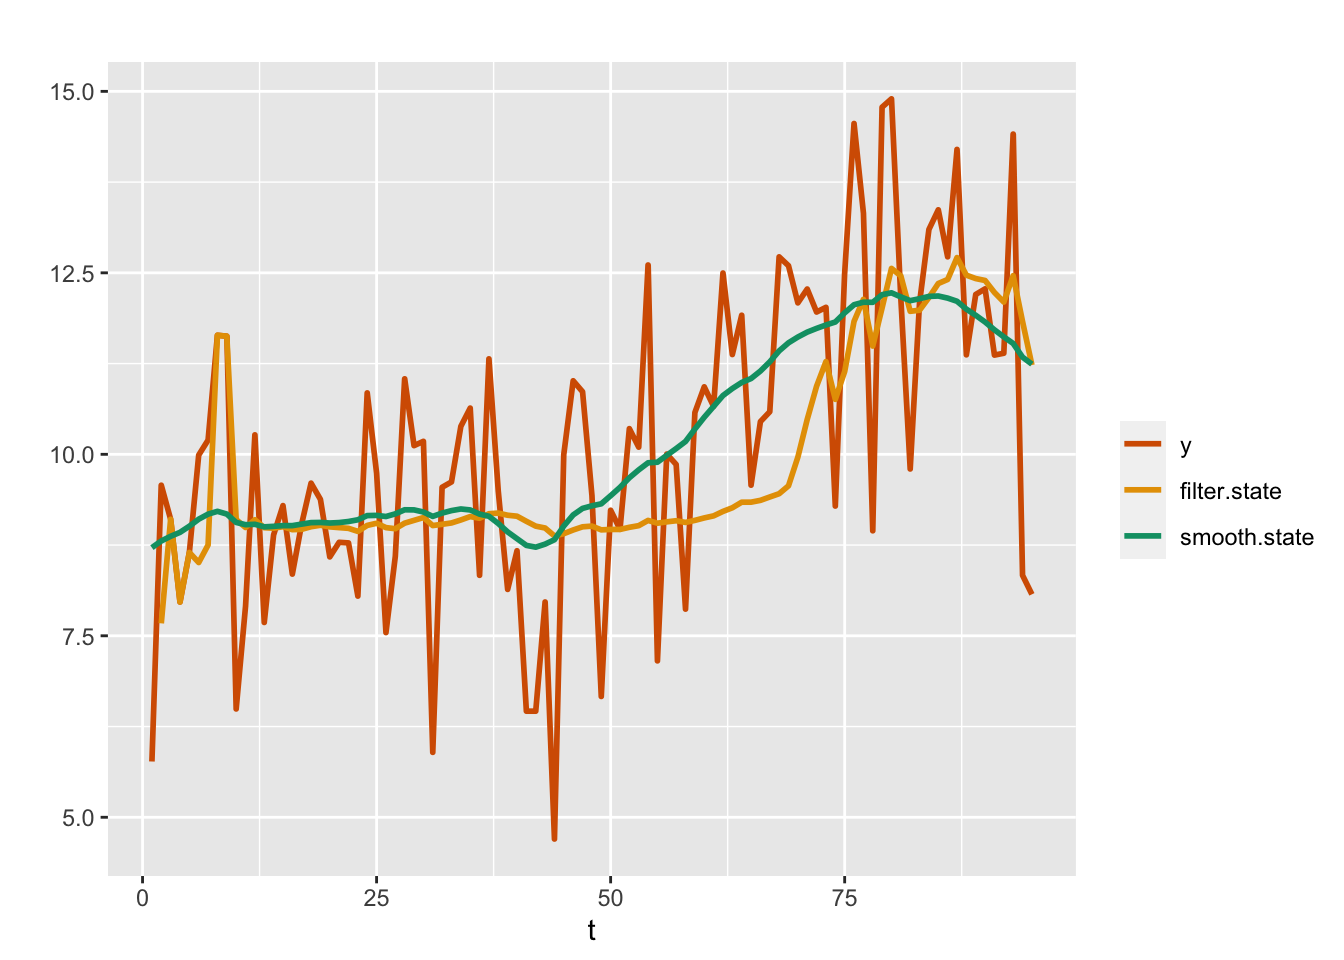 Observed data (red) and posterior means from the filtering (yellow) and smoothing (green) distributions for a random walk plus noise model (Model 2).